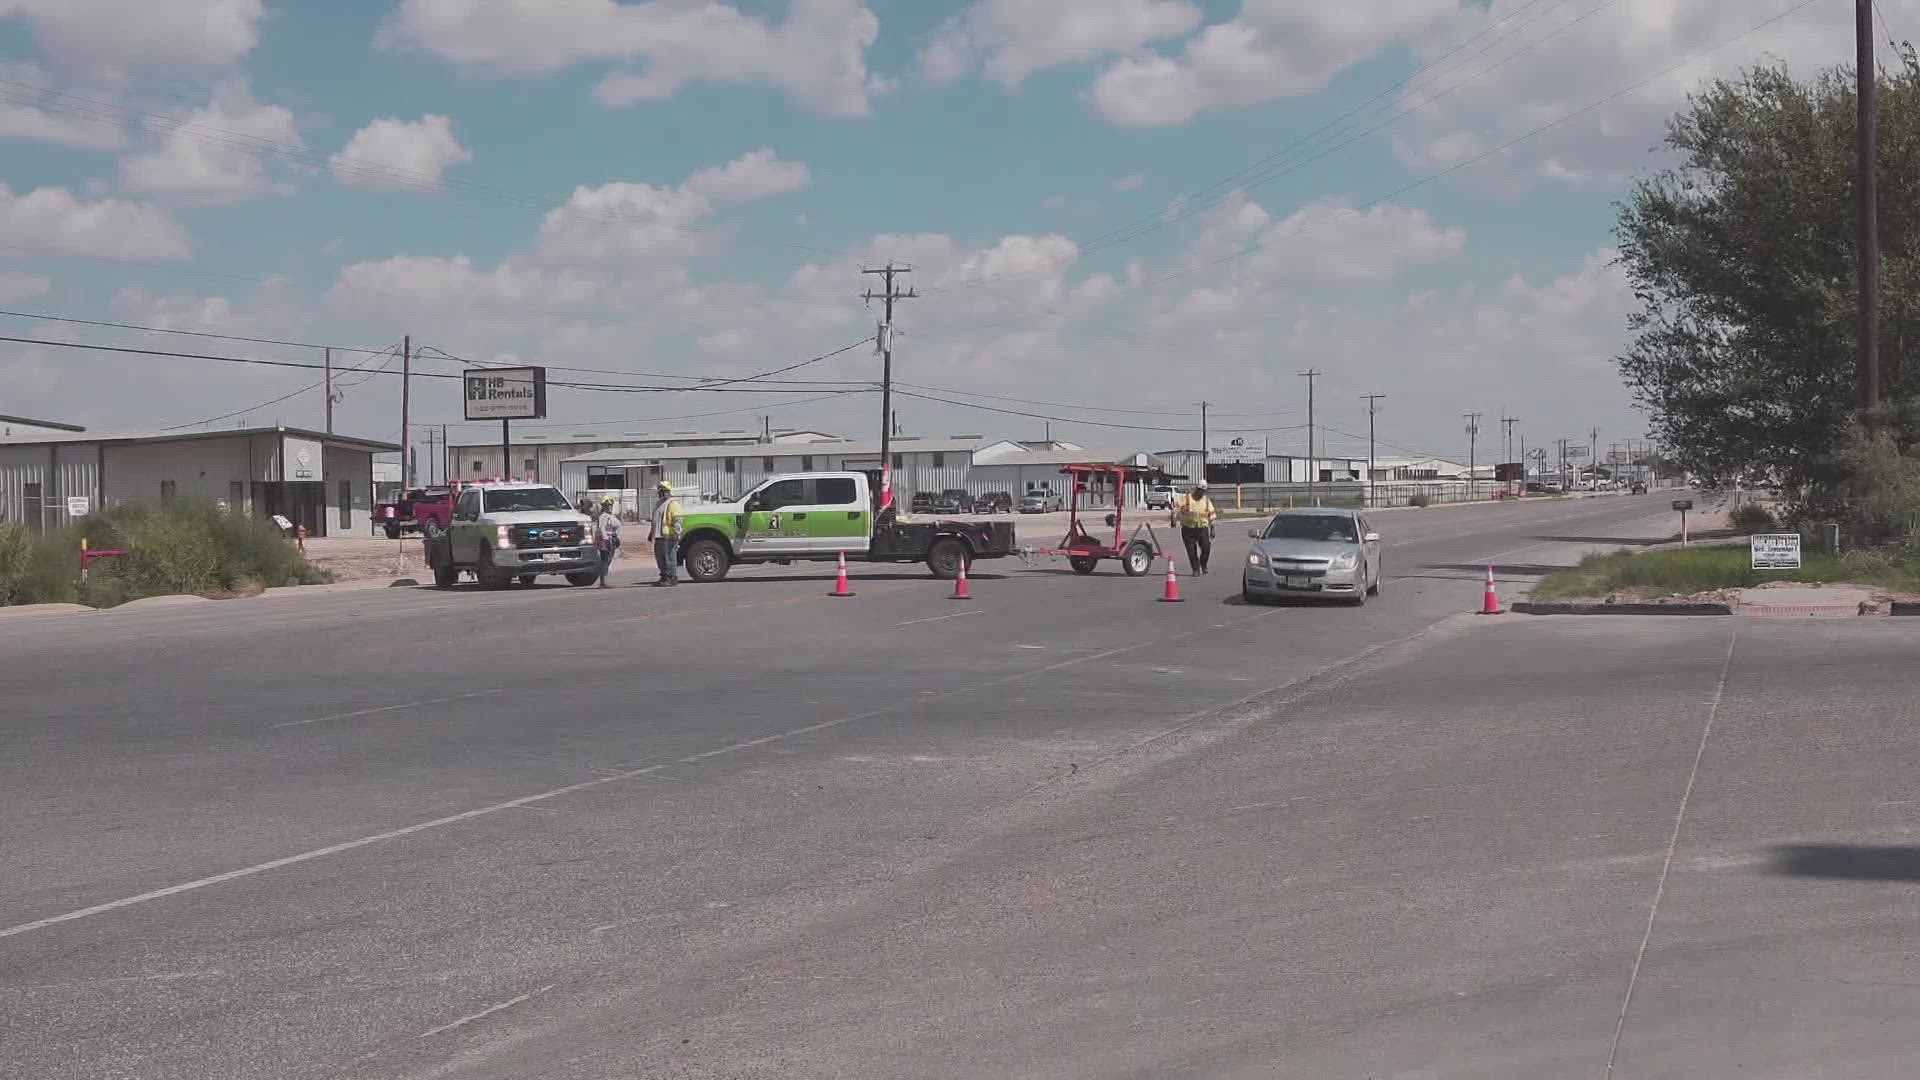 According to TxDOT, a pedestrian in Reeves County was hit and killed by a semi-truck sometime before 1:30 p.m.